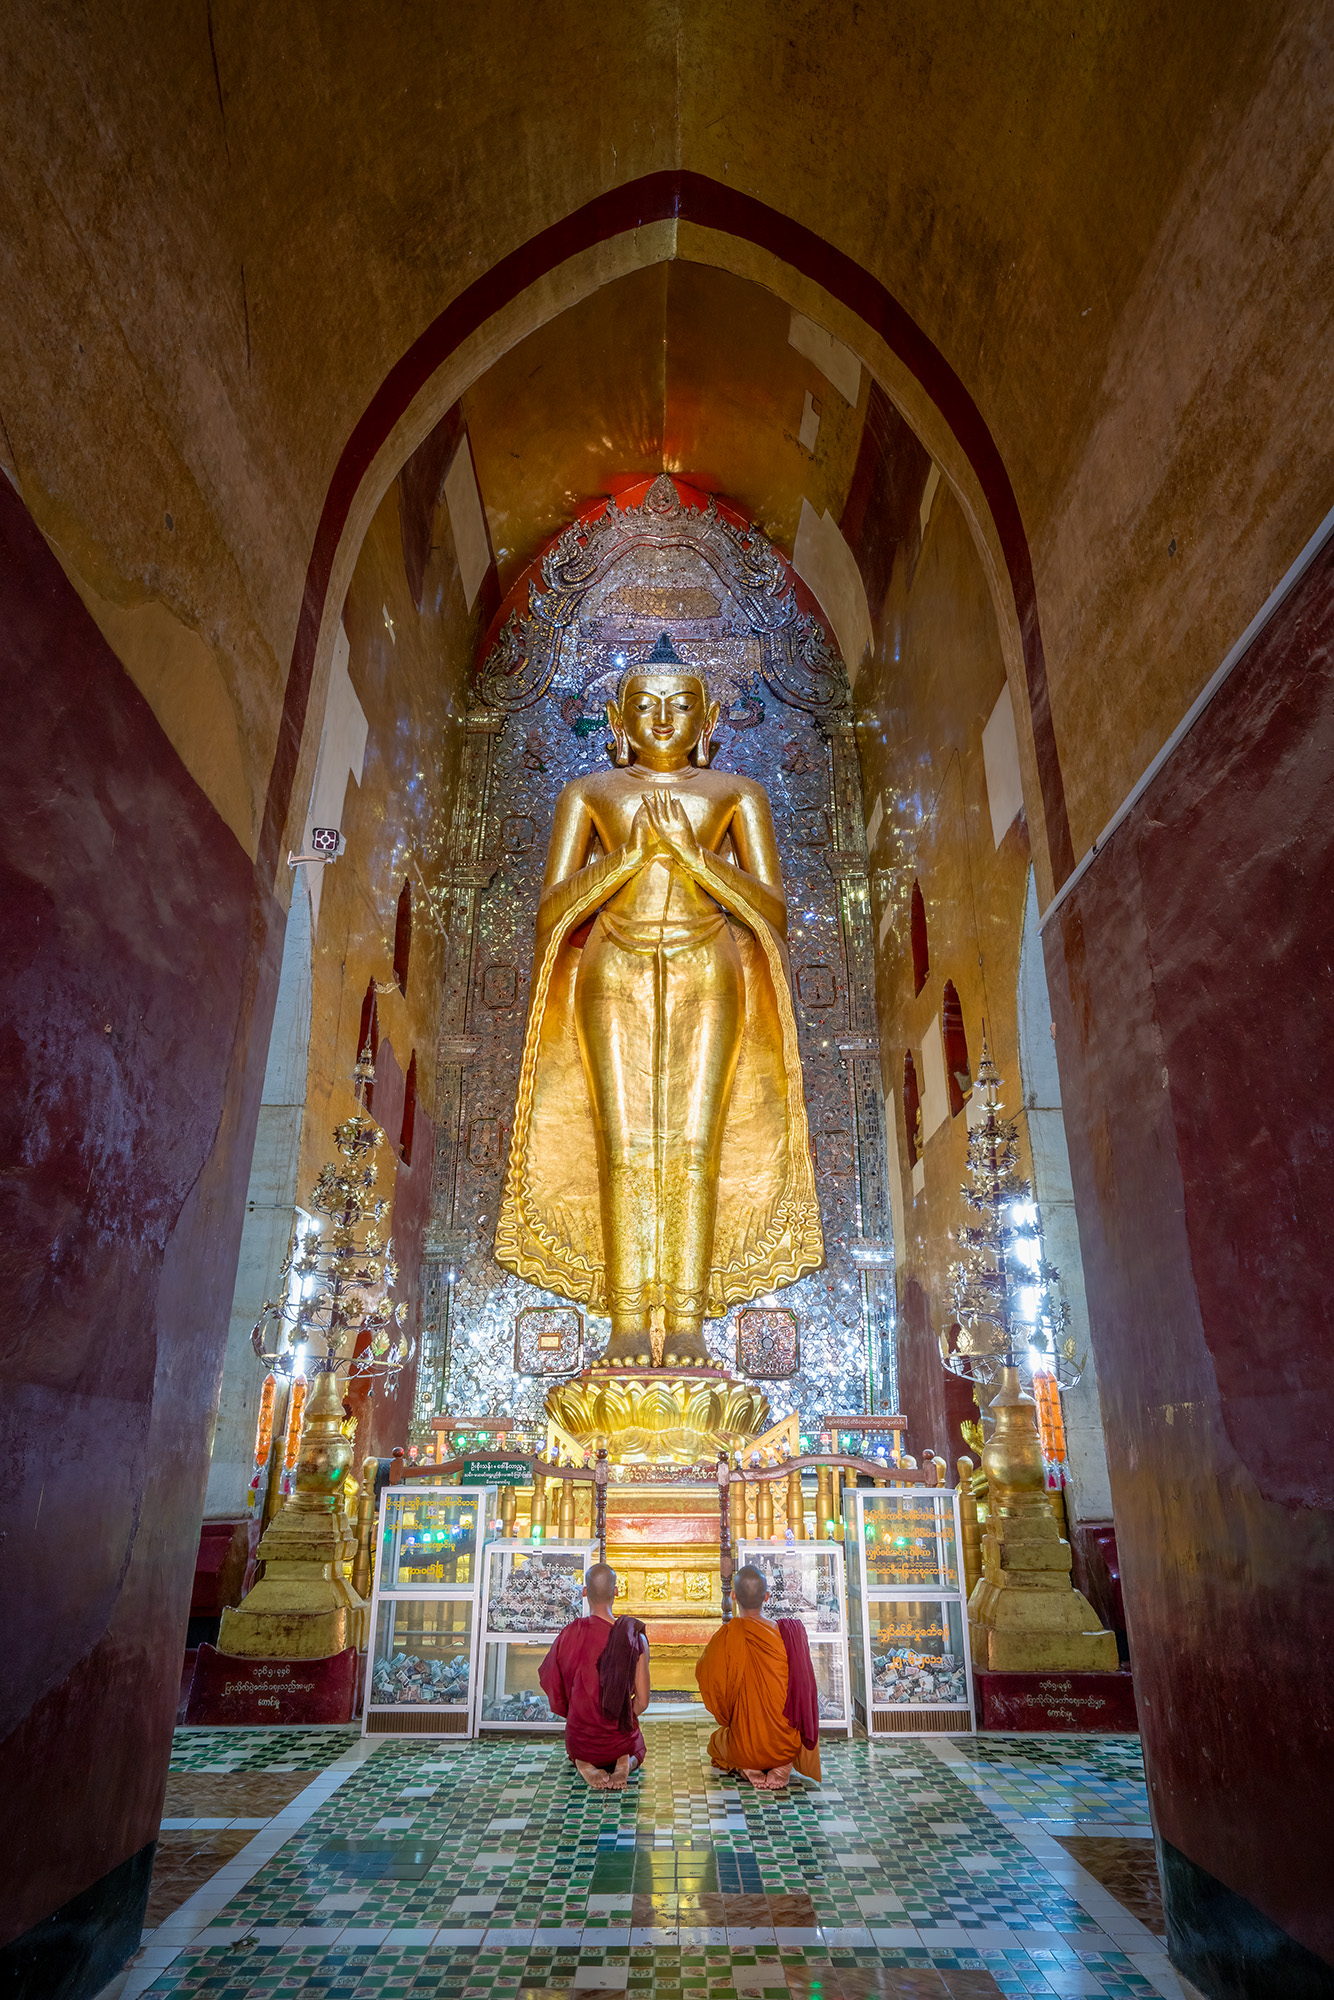 Inside a grand temple of Bagan, Myanmar, "Devotion in Golden Hues" reveals a striking vertical composition. At the heart of the...